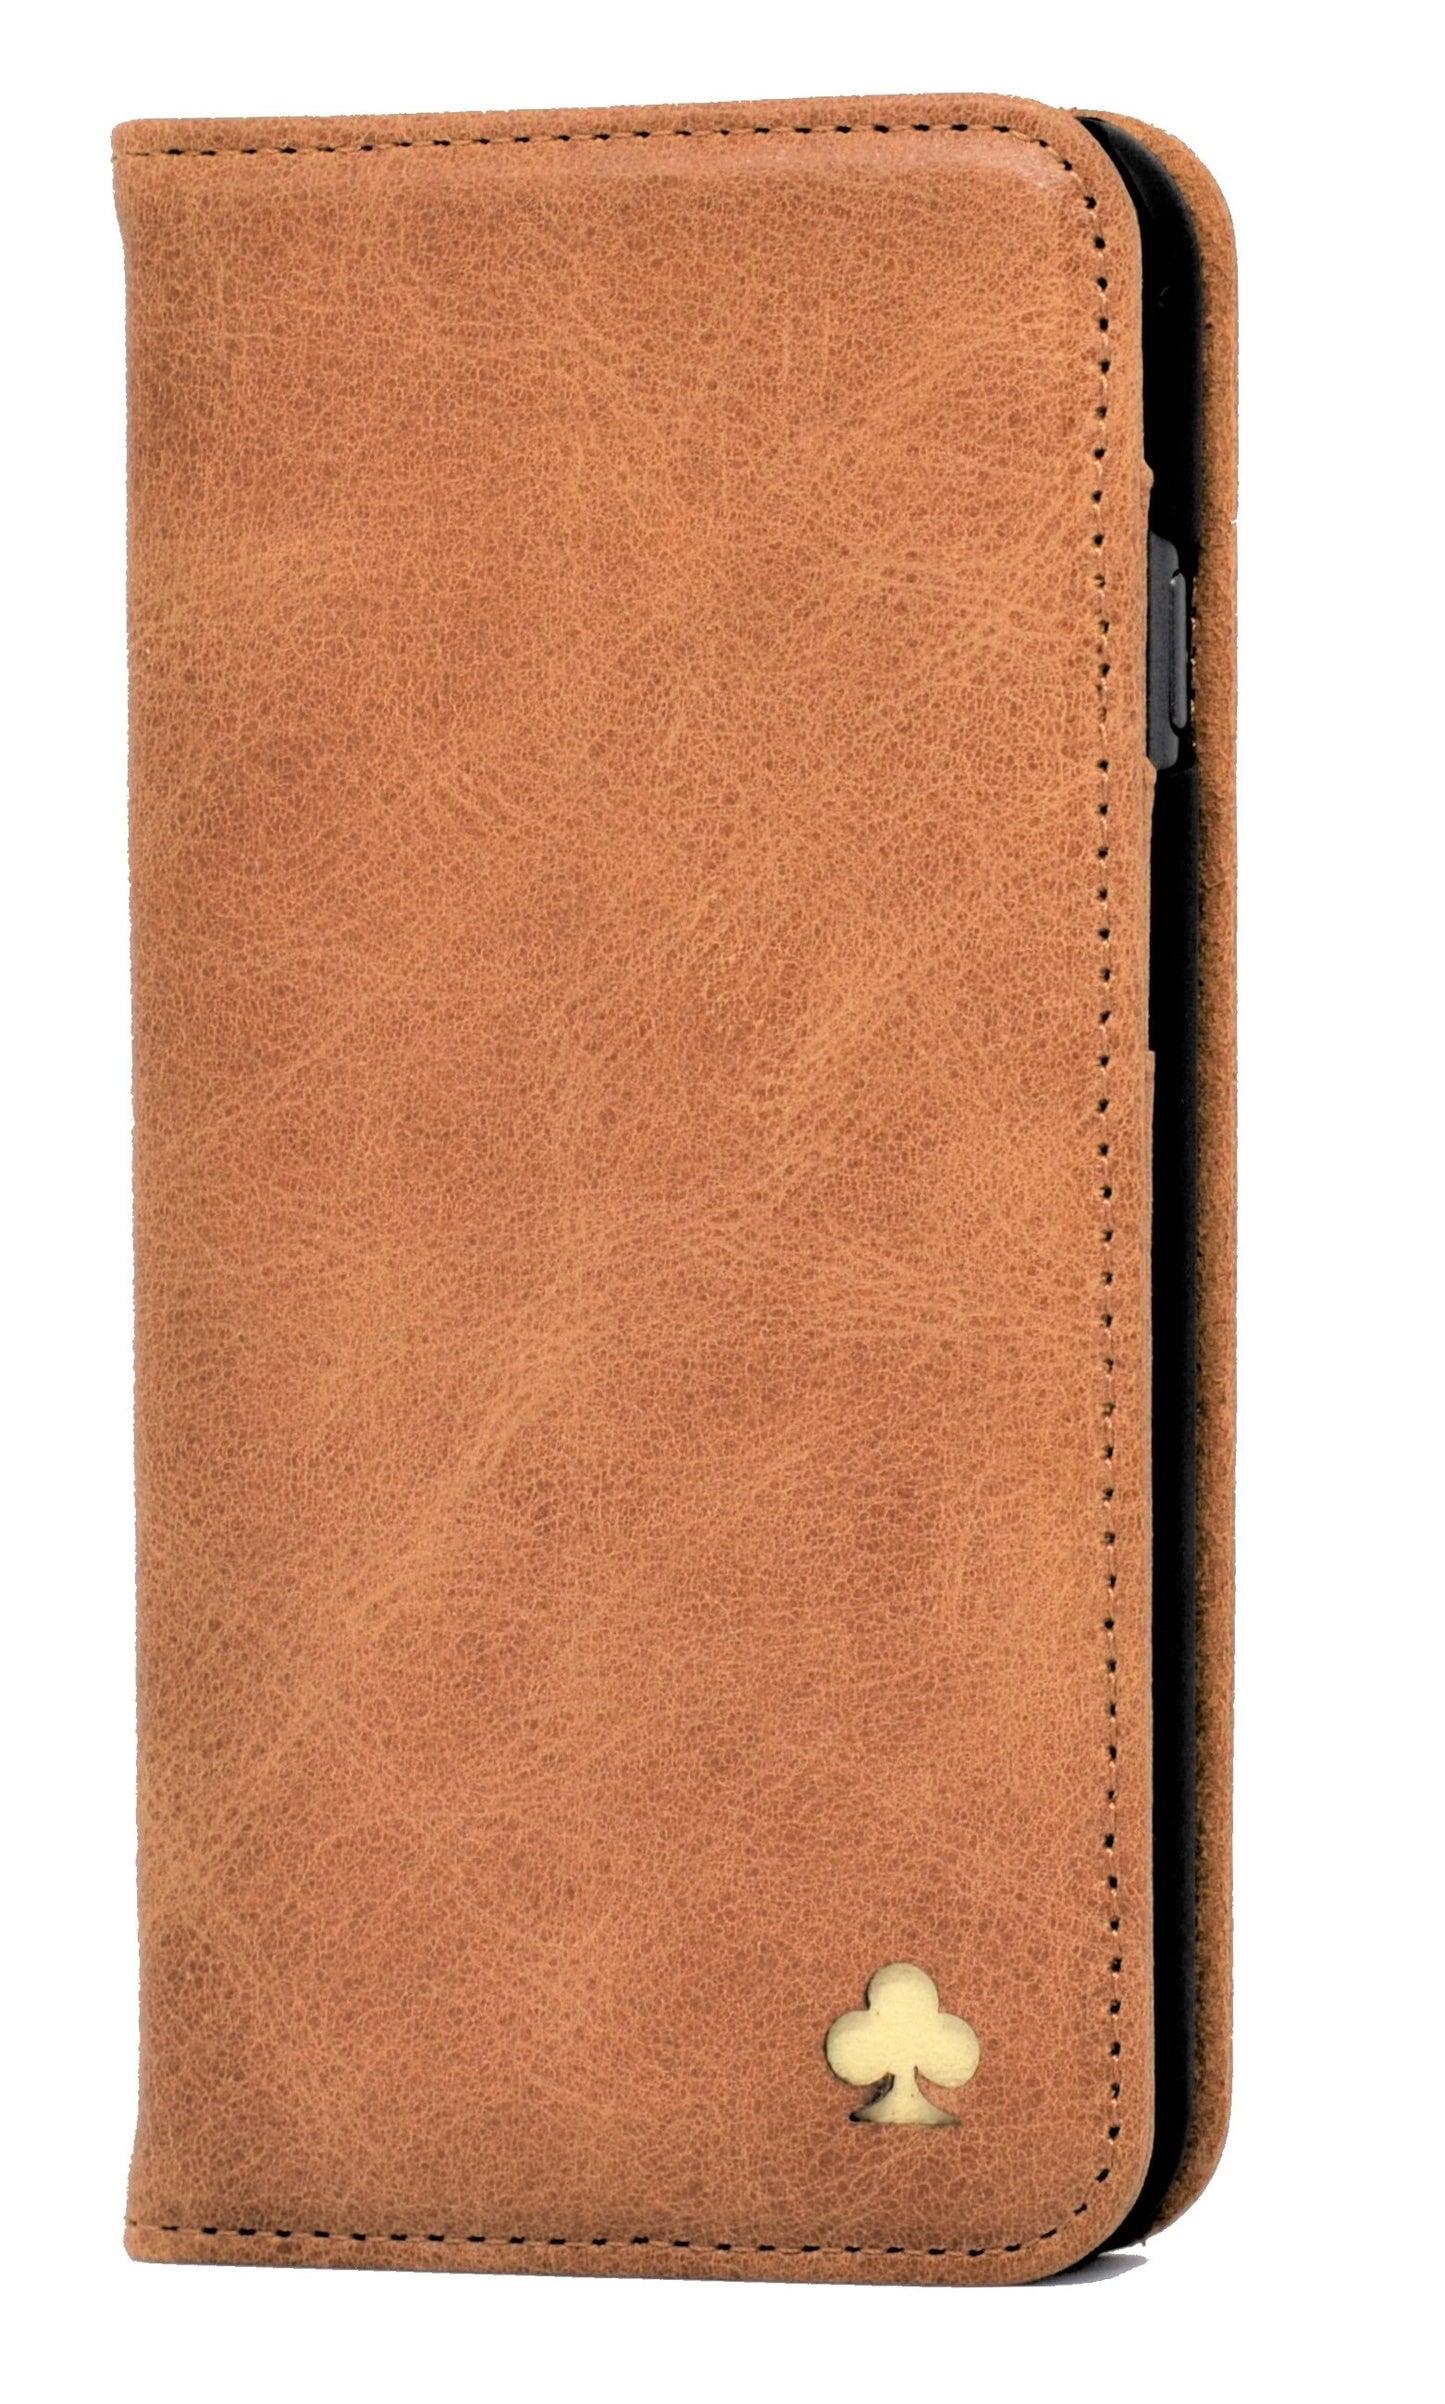 Samsung Galaxy S22 Plus Leather Case. Premium Slim Genuine Leather Stand Case/Cover/Wallet (Tan)